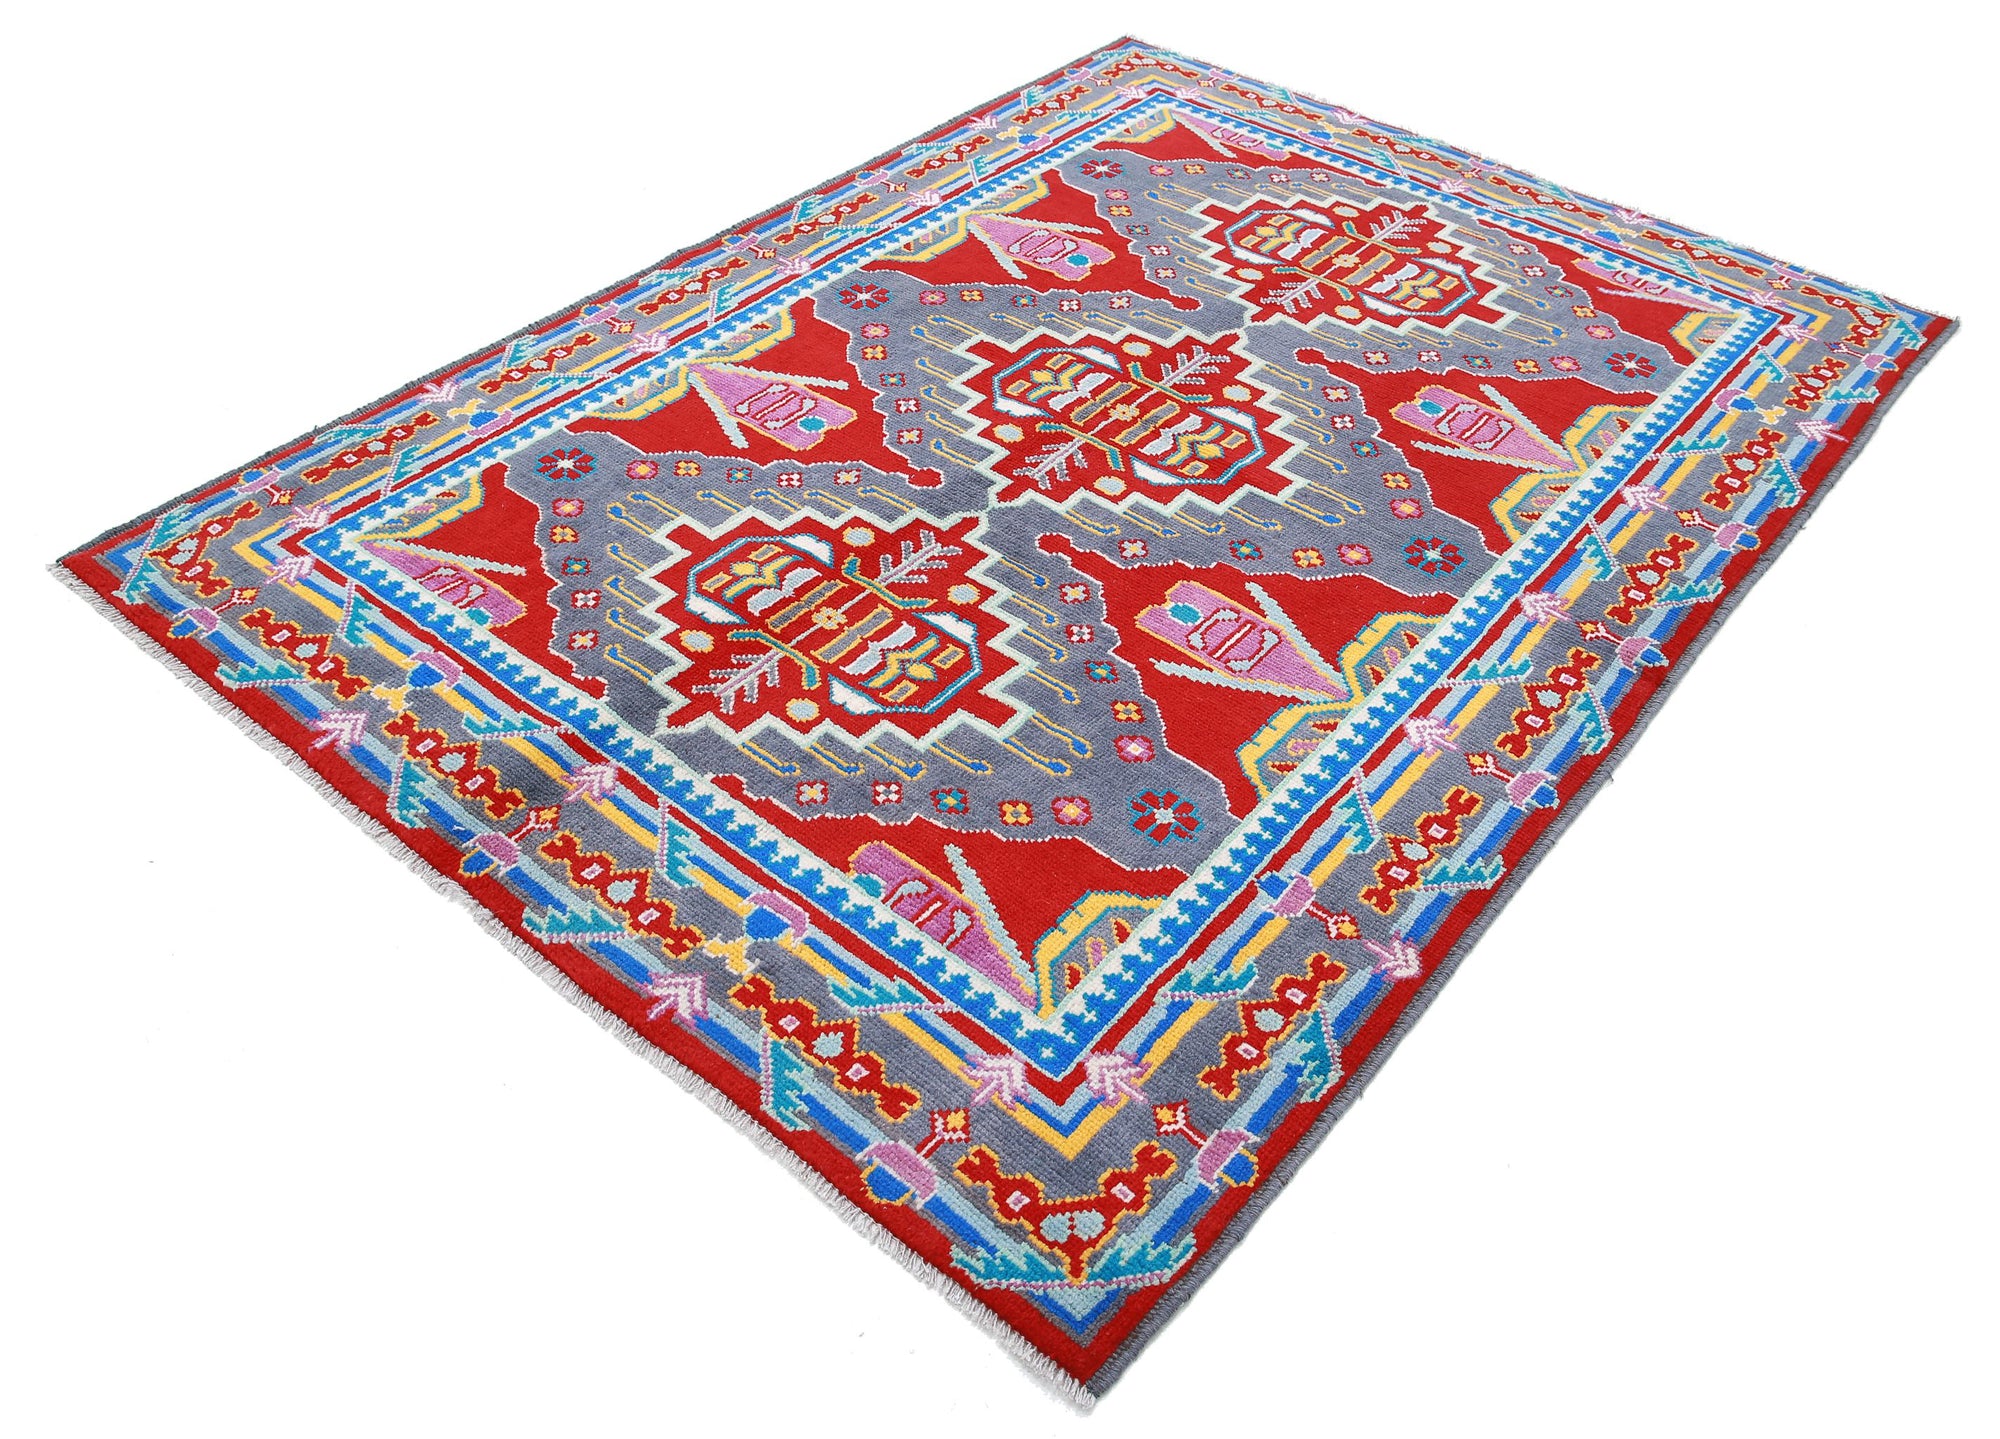 Revival-hand-knotted-qarghani-wool-rug-5014224-2.jpg